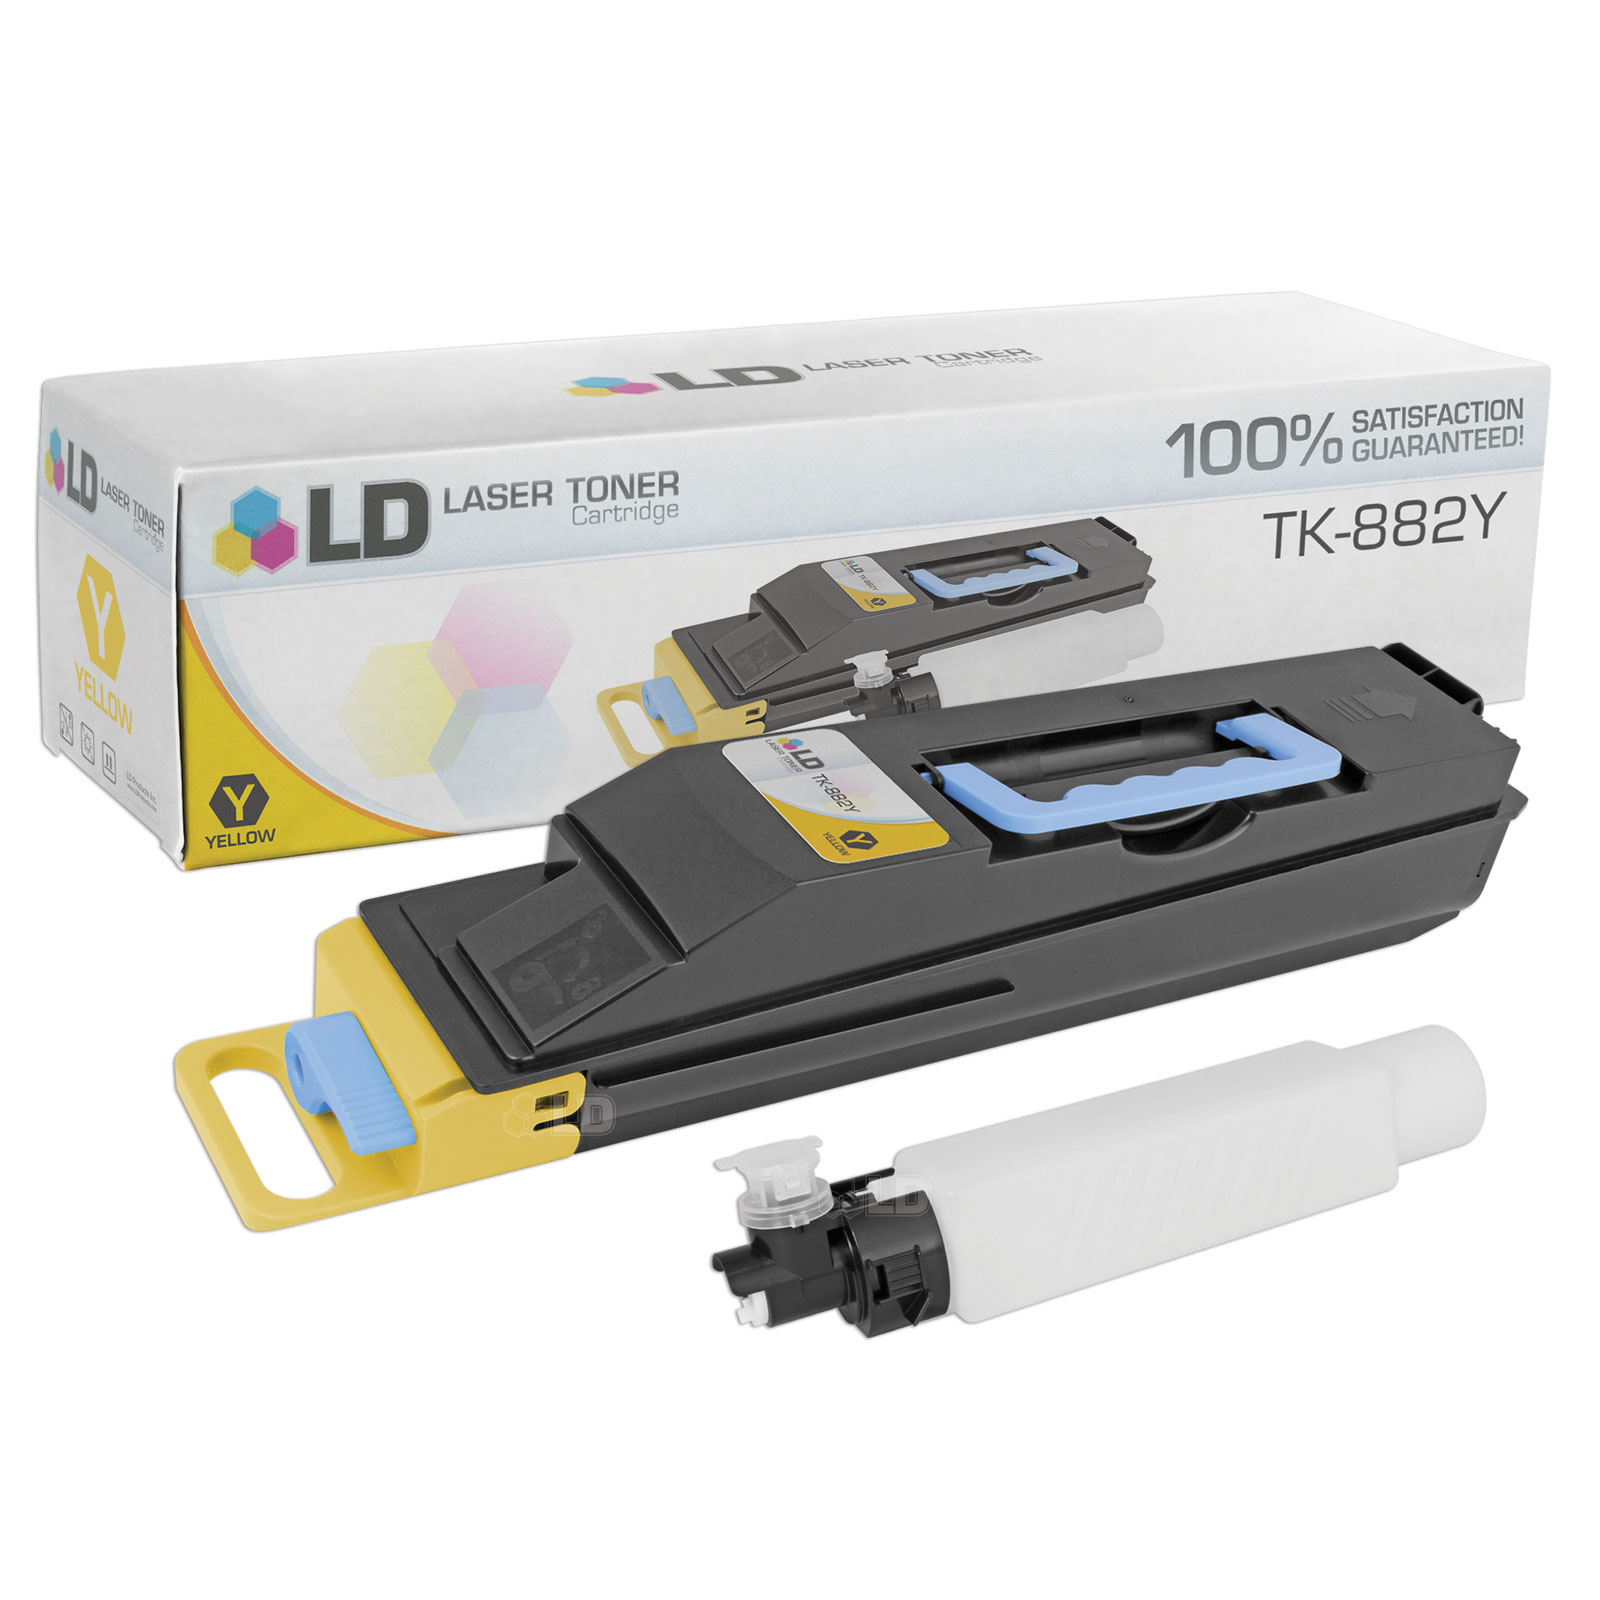 LD Compatible Replacement for Kyocera-Mita 1T02KAAUS0 (TK-882Y) Yellow Laser Toner Cartridge for use in Kyocera-Mita FS-C8500DN - image 1 of 1